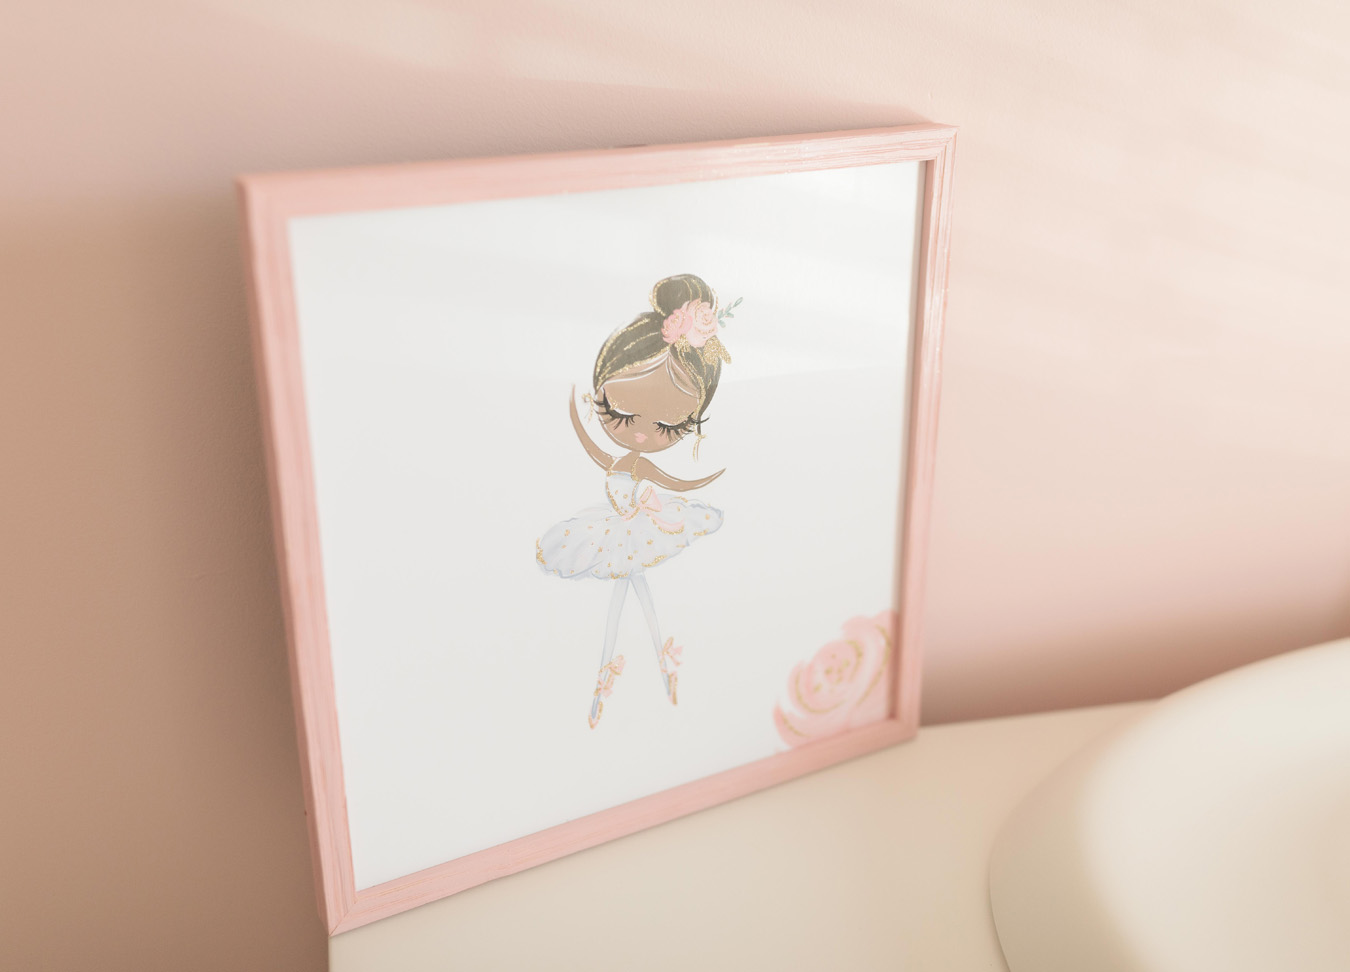 picture of a girl wearing a tutu in a pink frame